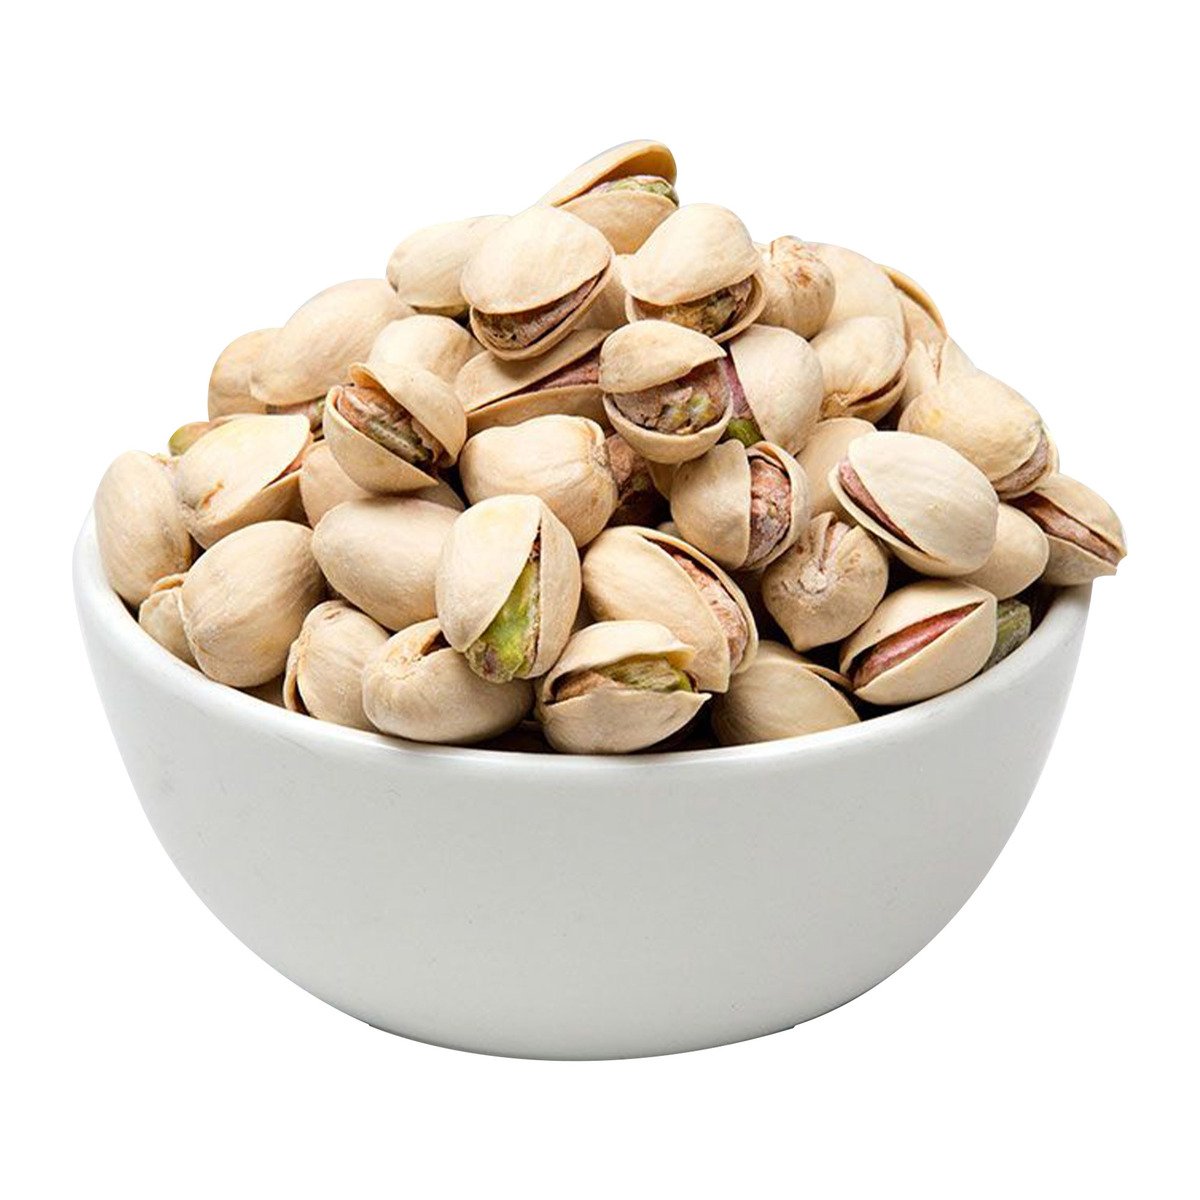 USA Salted Roasted Pistachio 500 g